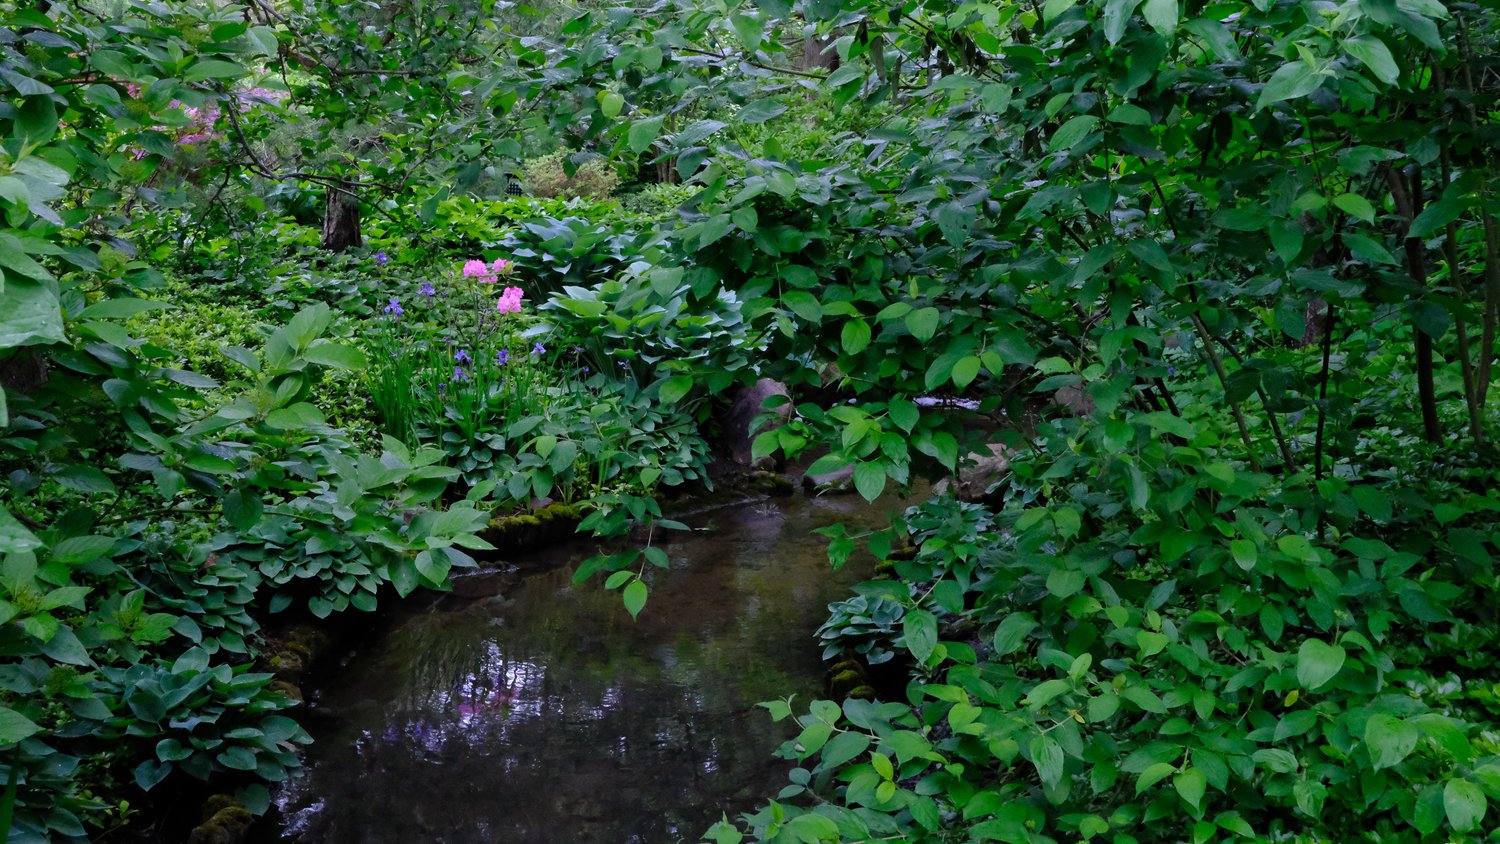 Pink and purple flowers reflected in the brook.